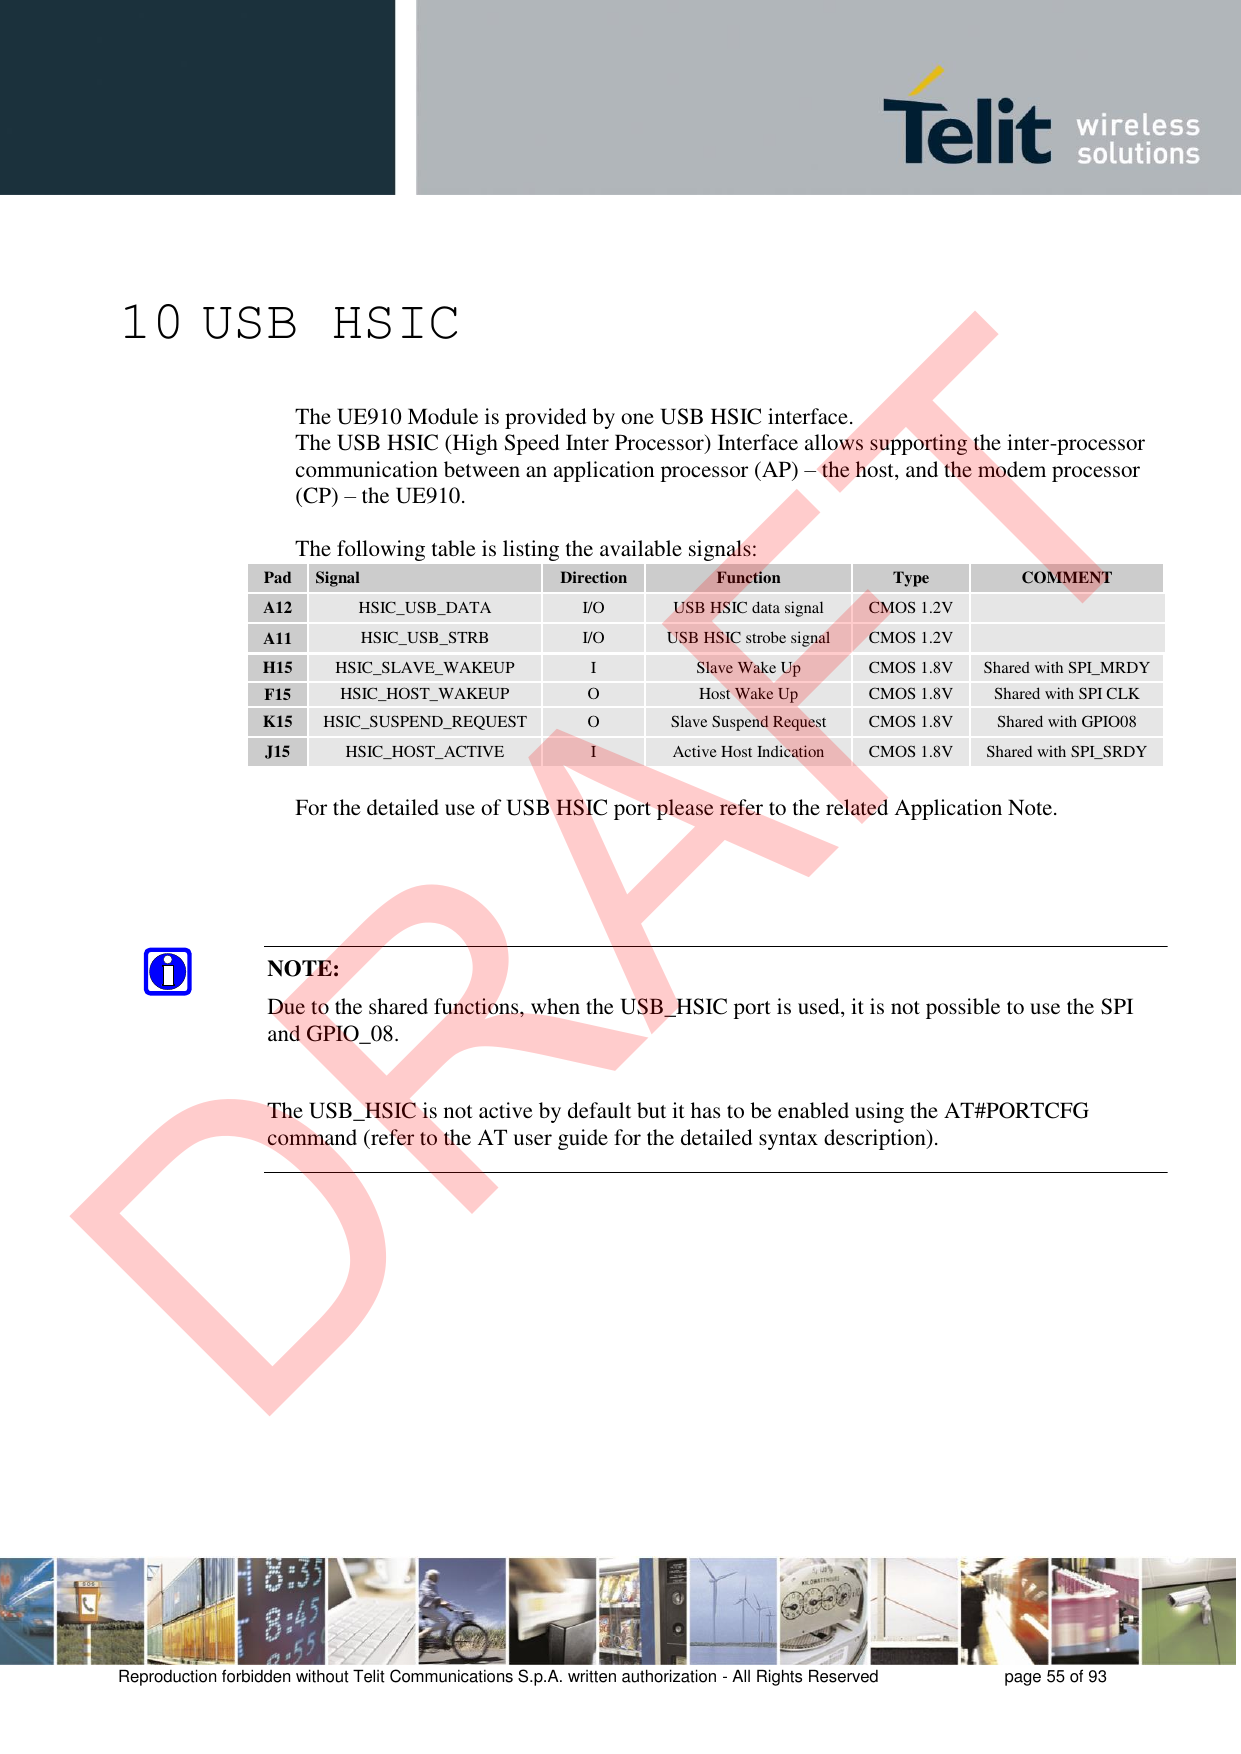 Reproduction forbidden without Telit Communications S.p.A. written authorization - All Rights Reserved  page 55 of 93 10 USB HSIC The UE910 Module is provided by one USB HSIC interface. The USB HSIC (High Speed Inter Processor) Interface allows supporting the inter-processor communication between an application processor (AP) – the host, and the modem processor  (CP) – the UE910. The following table is listing the available signals: Pad Signal Direction Function Type COMMENT A12 HSIC_USB_DATA I/O USB HSIC data signal CMOS 1.2V A11 HSIC_USB_STRB I/O USB HSIC strobe signal CMOS 1.2V H15 HSIC_SLAVE_WAKEUP I Slave Wake Up CMOS 1.8V Shared with SPI_MRDY F15 HSIC_HOST_WAKEUP O Host Wake Up CMOS 1.8V Shared with SPI CLK K15 HSIC_SUSPEND_REQUEST O Slave Suspend Request CMOS 1.8V Shared with GPIO08 J15 HSIC_HOST_ACTIVE I Active Host Indication CMOS 1.8V Shared with SPI_SRDY For the detailed use of USB HSIC port please refer to the related Application Note. NOTE: Due to the shared functions, when the USB_HSIC port is used, it is not possible to use the SPI and GPIO_08. The USB_HSIC is not active by default but it has to be enabled using the AT#PORTCFG command (refer to the AT user guide for the detailed syntax description). DRAFT